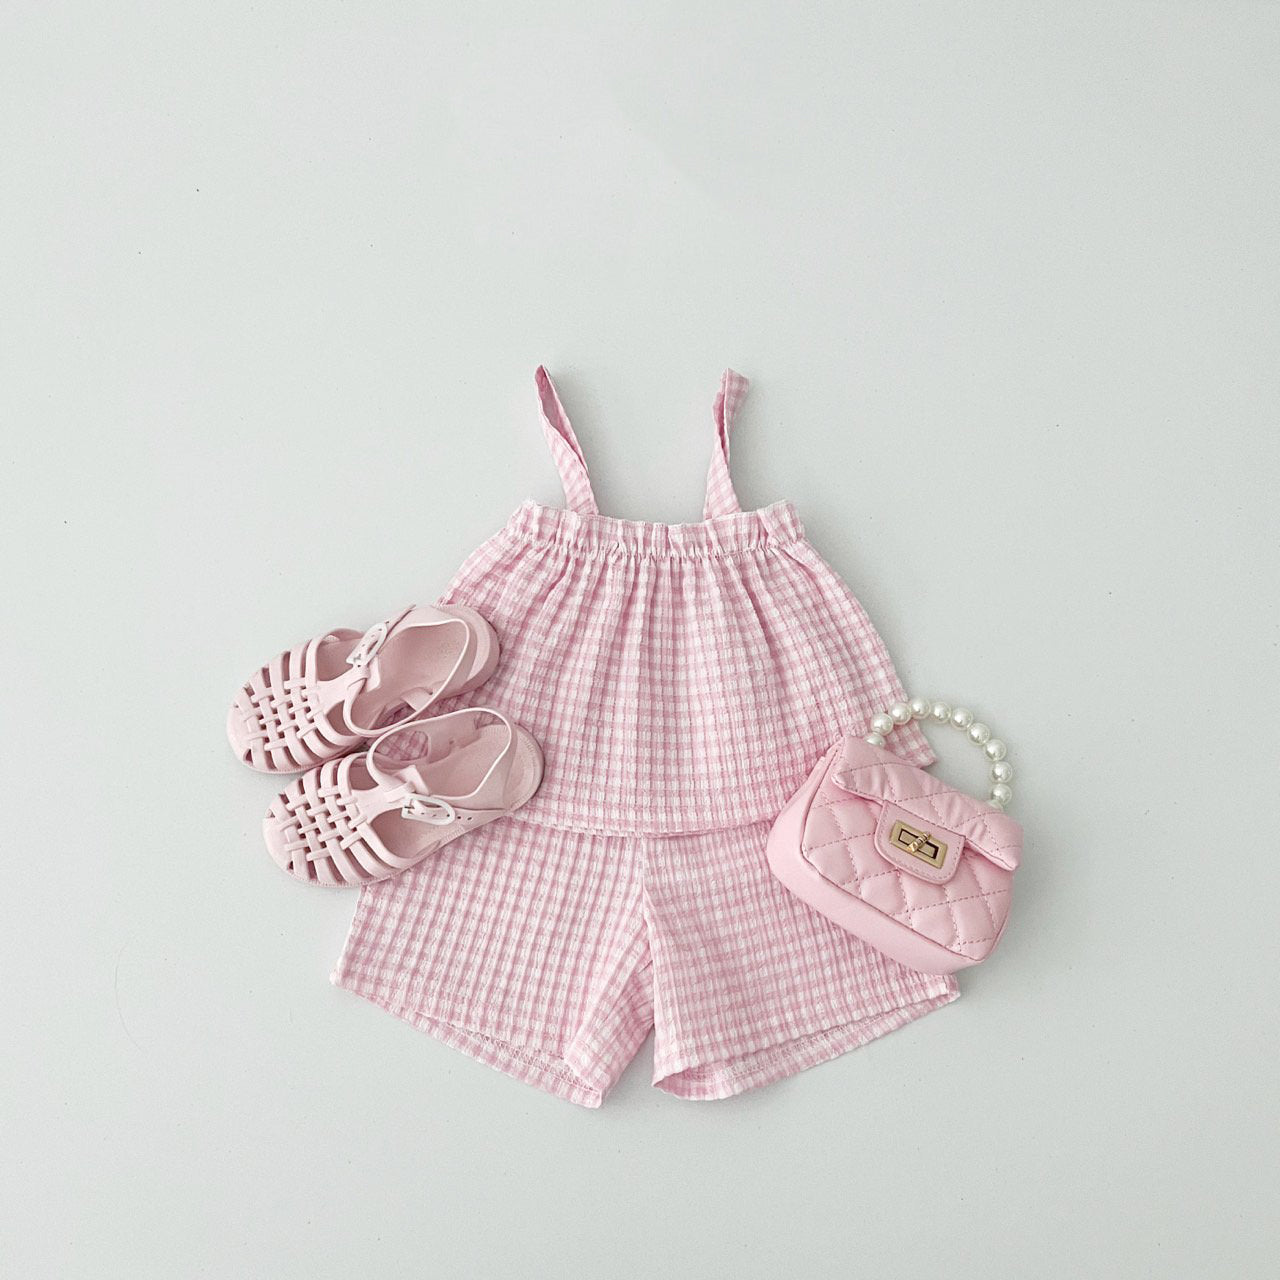 Kids Cool Plaid Tank Top and Shorts Set (2-7y) - 3 Colors